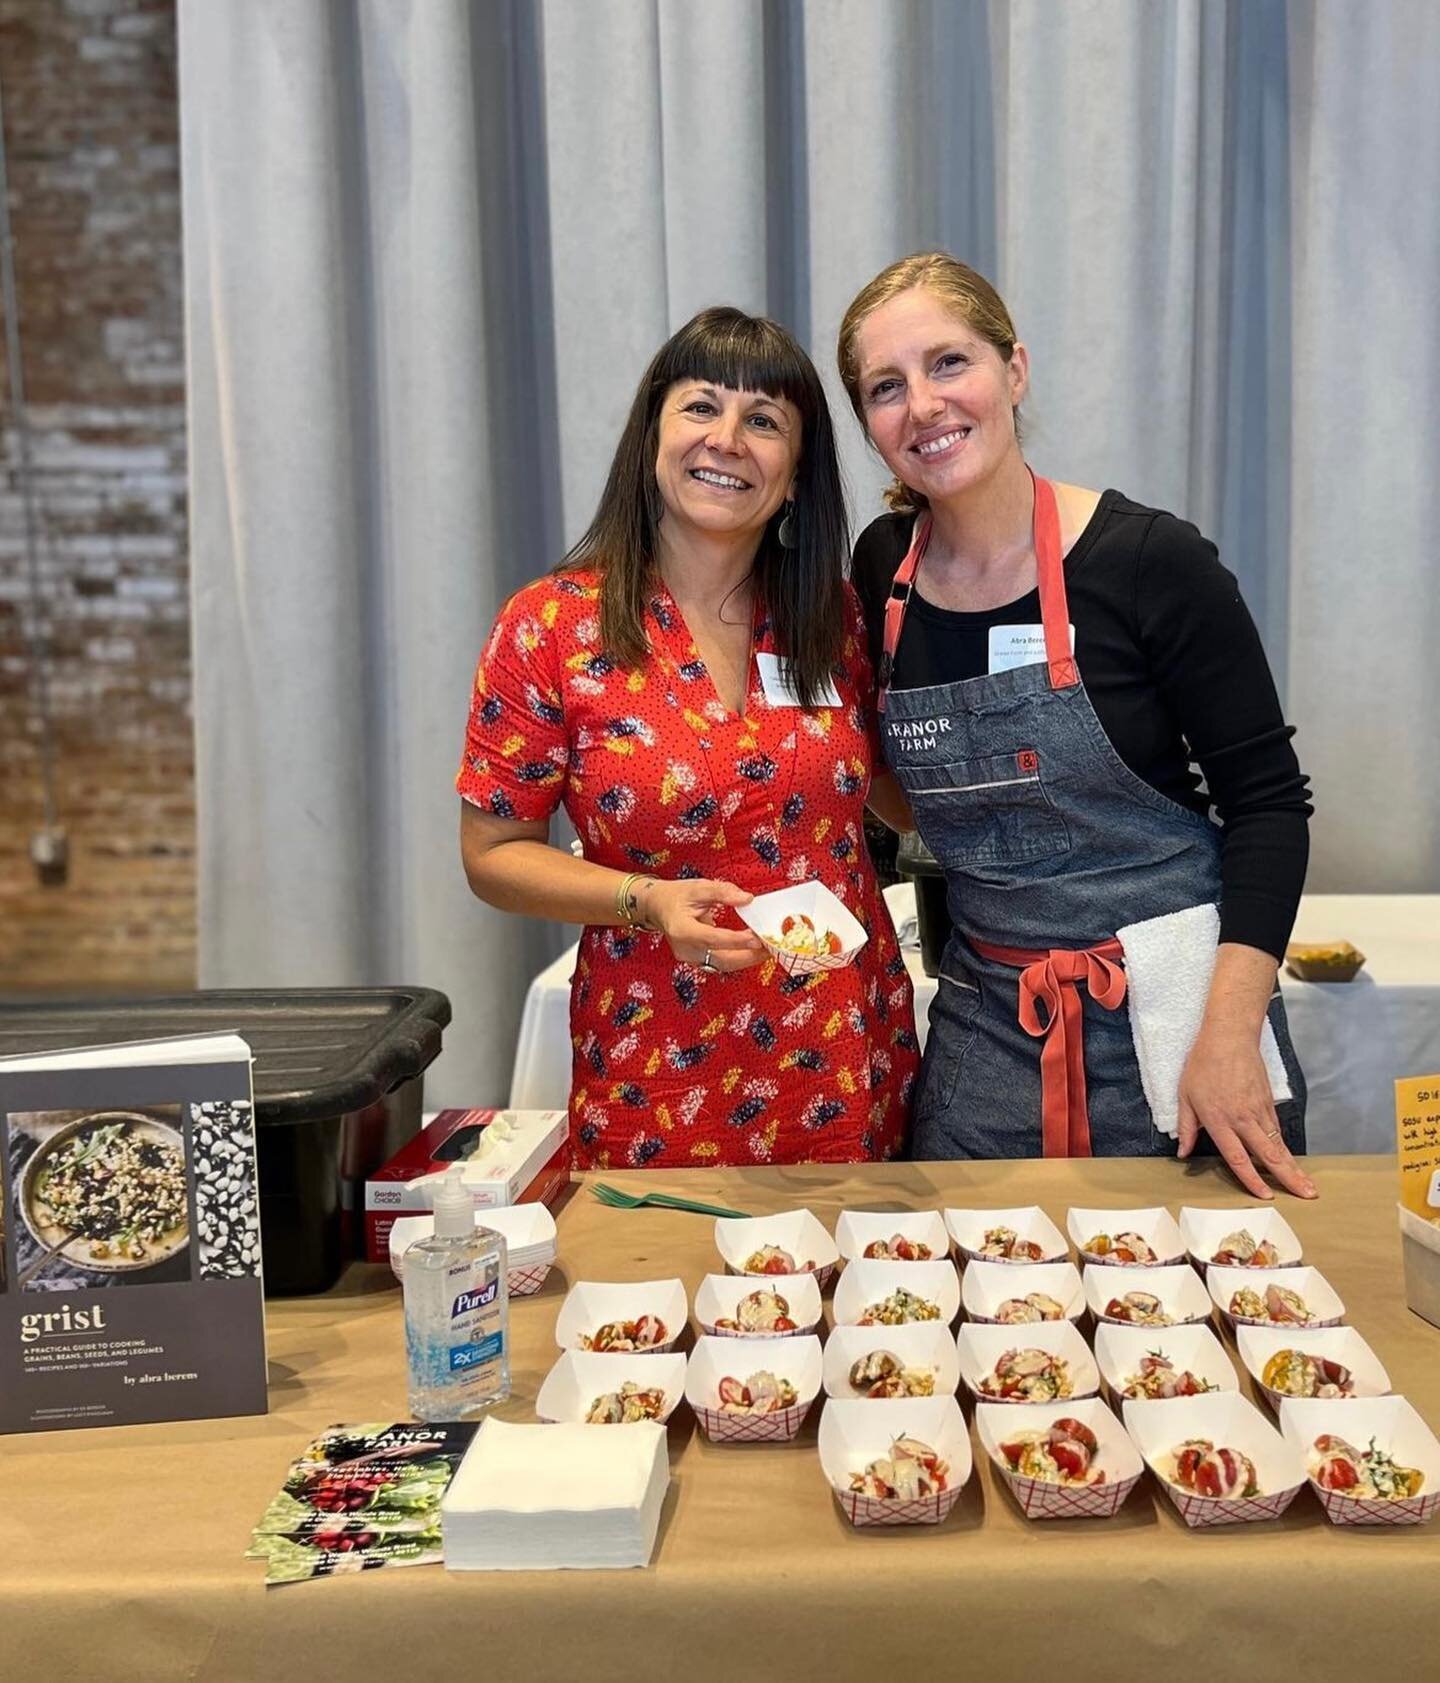 .
I&rsquo;m thrilled to invite you to join me and cookbook author Abra Berens for a @viviennepdx virtual event this Thursday to celebrate her new book Pulp which is all about cooking, both sweet and savory, with seasonal fruit. 

I met Abra when she 